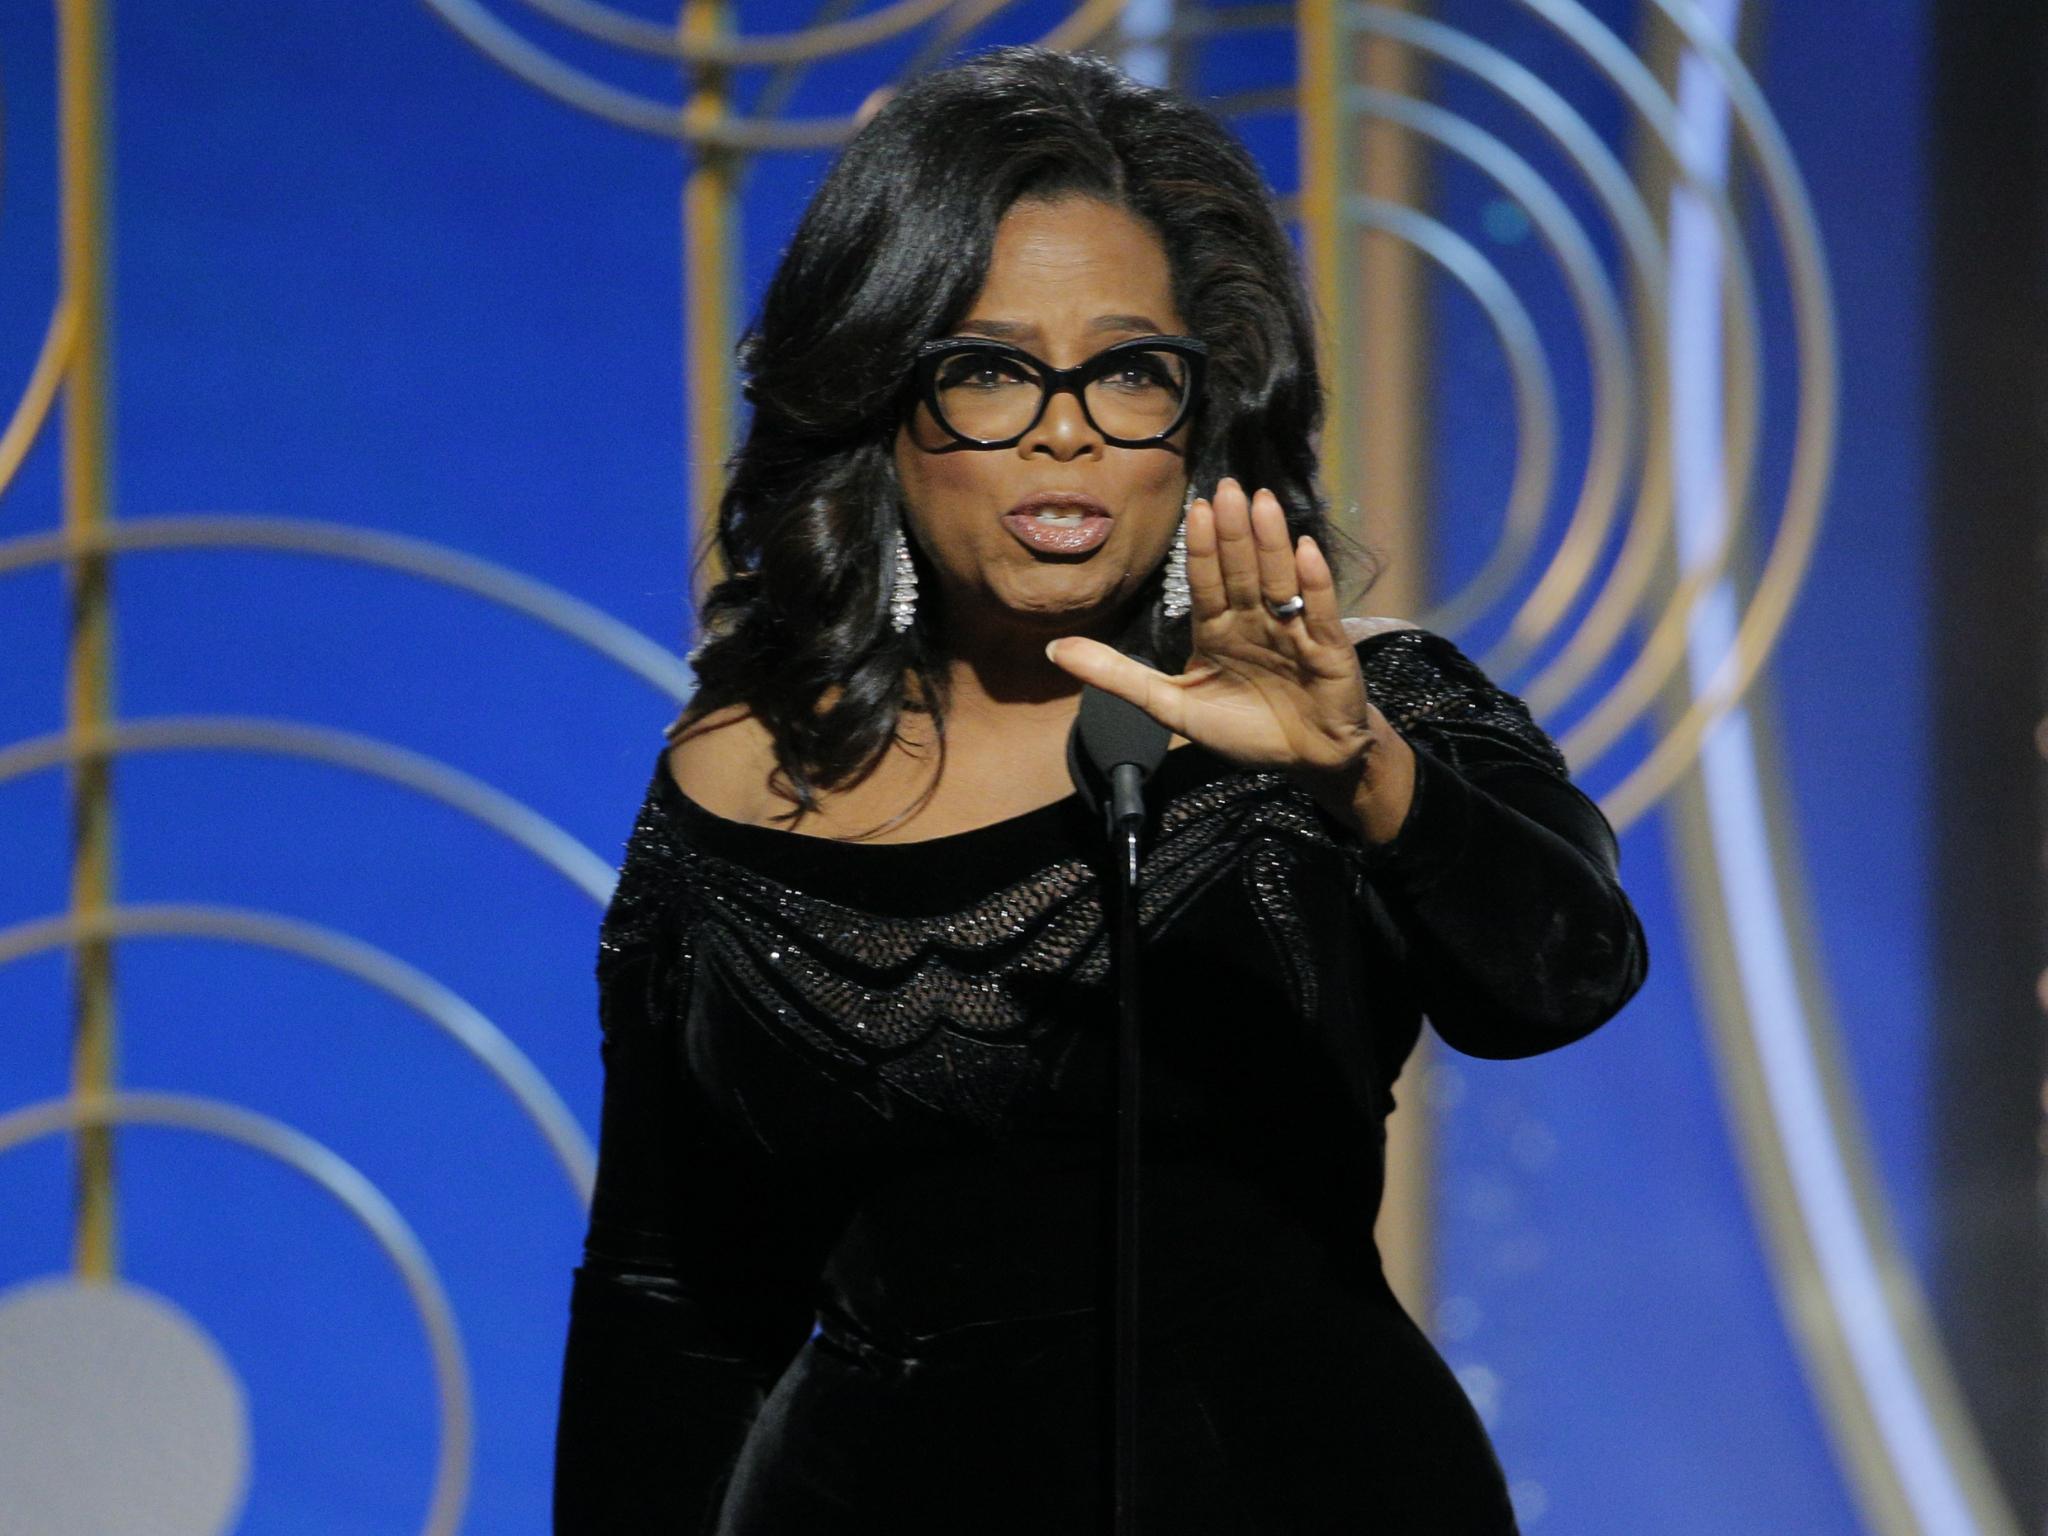 Oprah Winfrey accepts the 2018 Cecil B. DeMille Award during the 75th Annual Golden Globe Awards on 7 January 2018